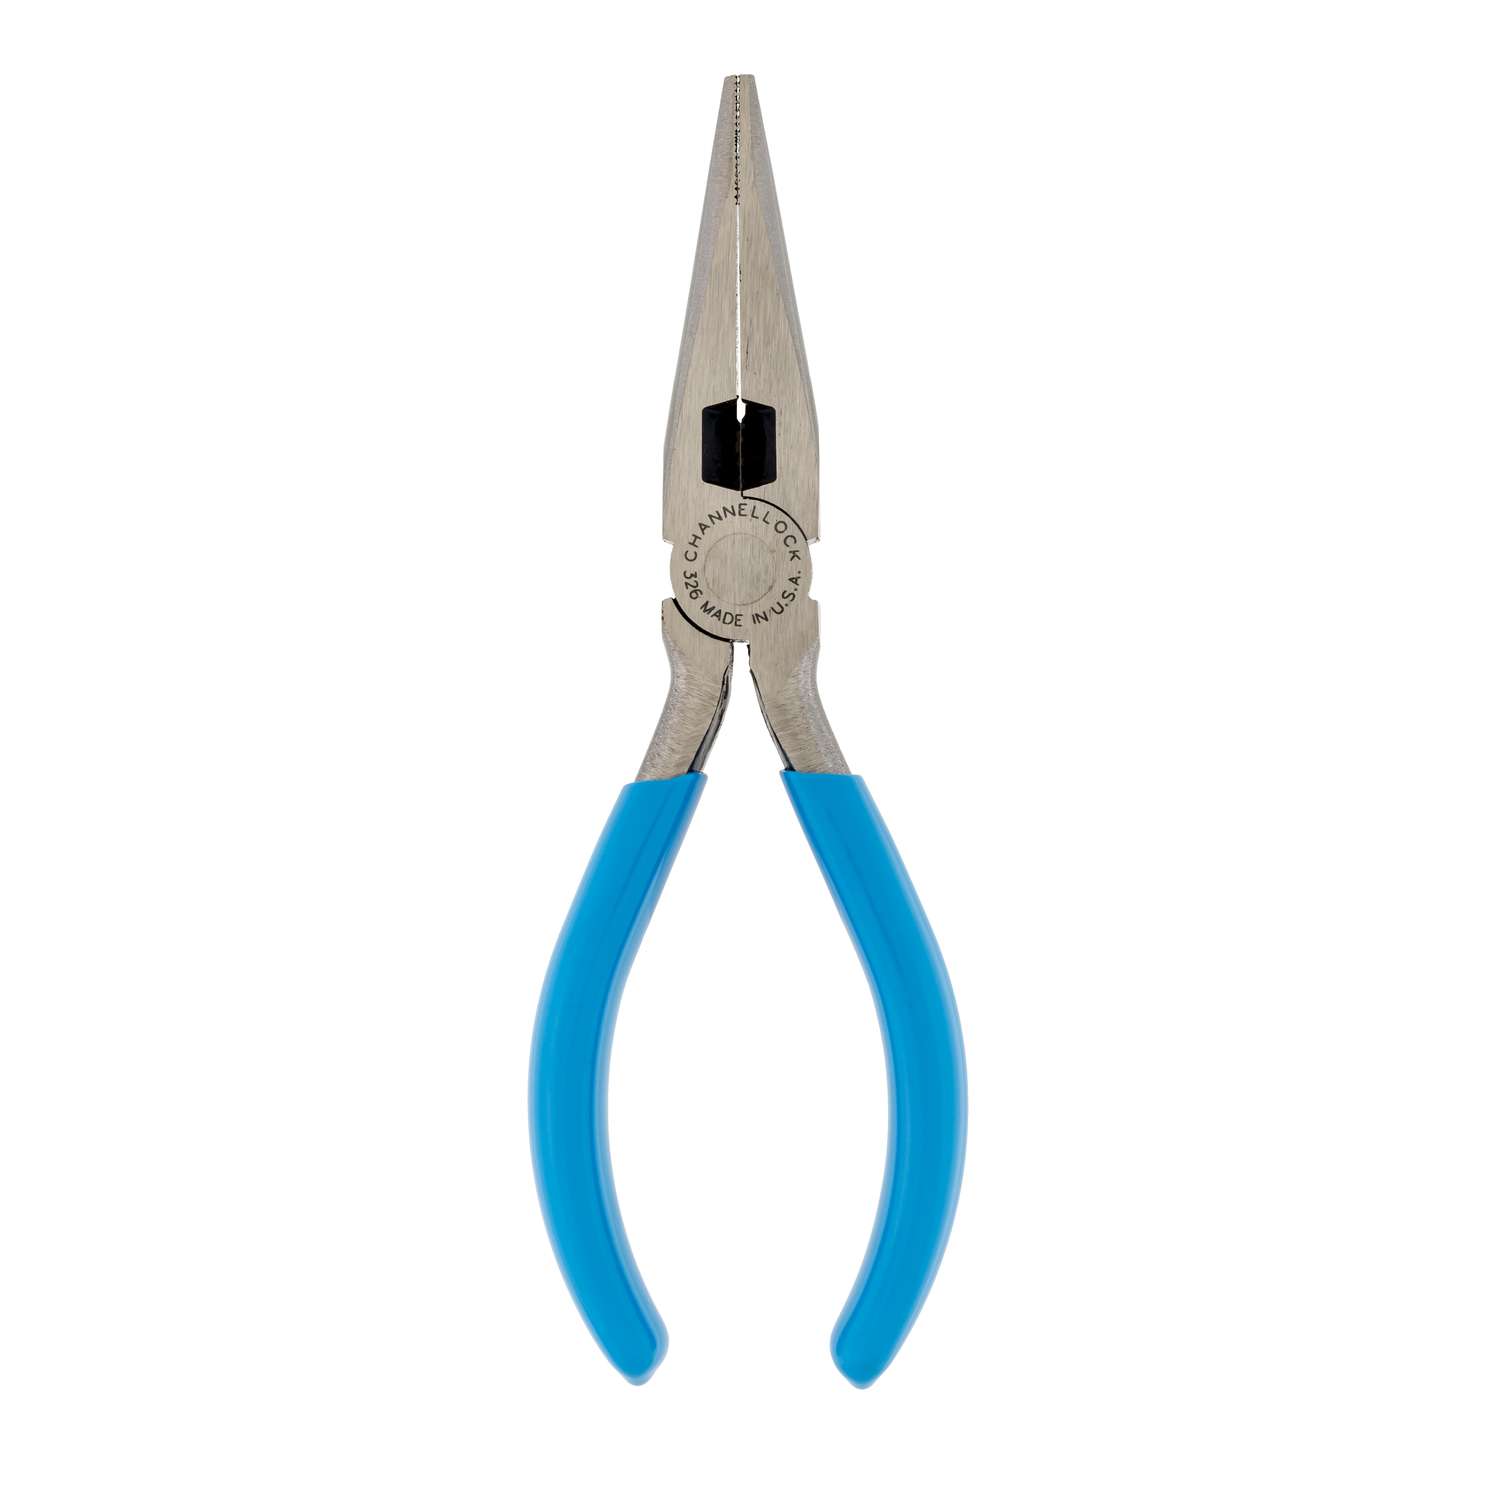 Craftsman 6 in. Drop Forged Steel Mini Needle Nose Pliers - Ace Hardware